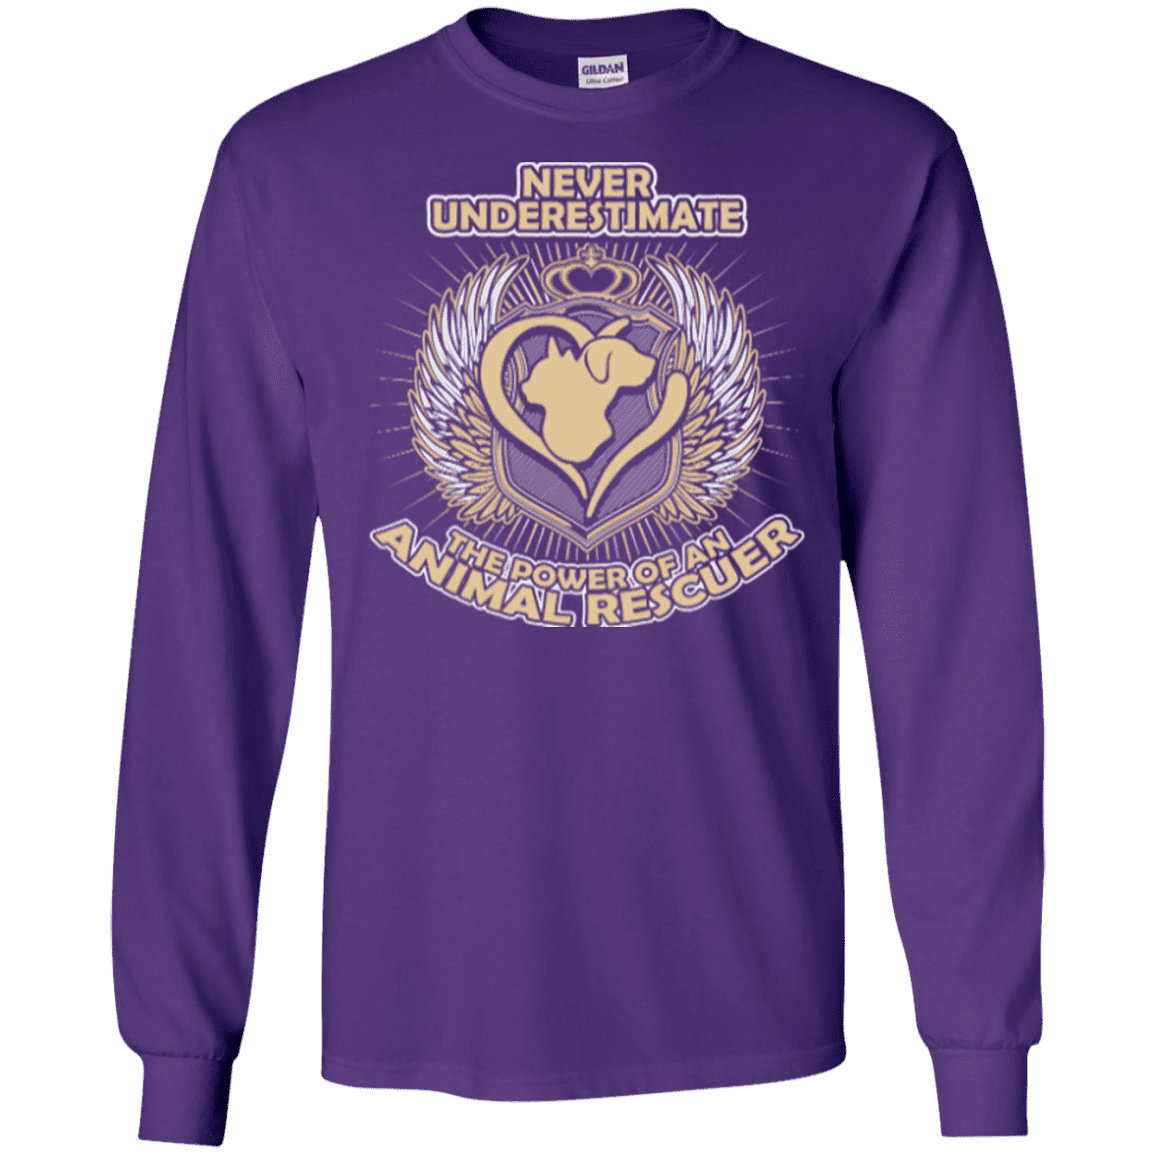 Power Of An Animal Rescuer - Long Sleeve T Shirt.